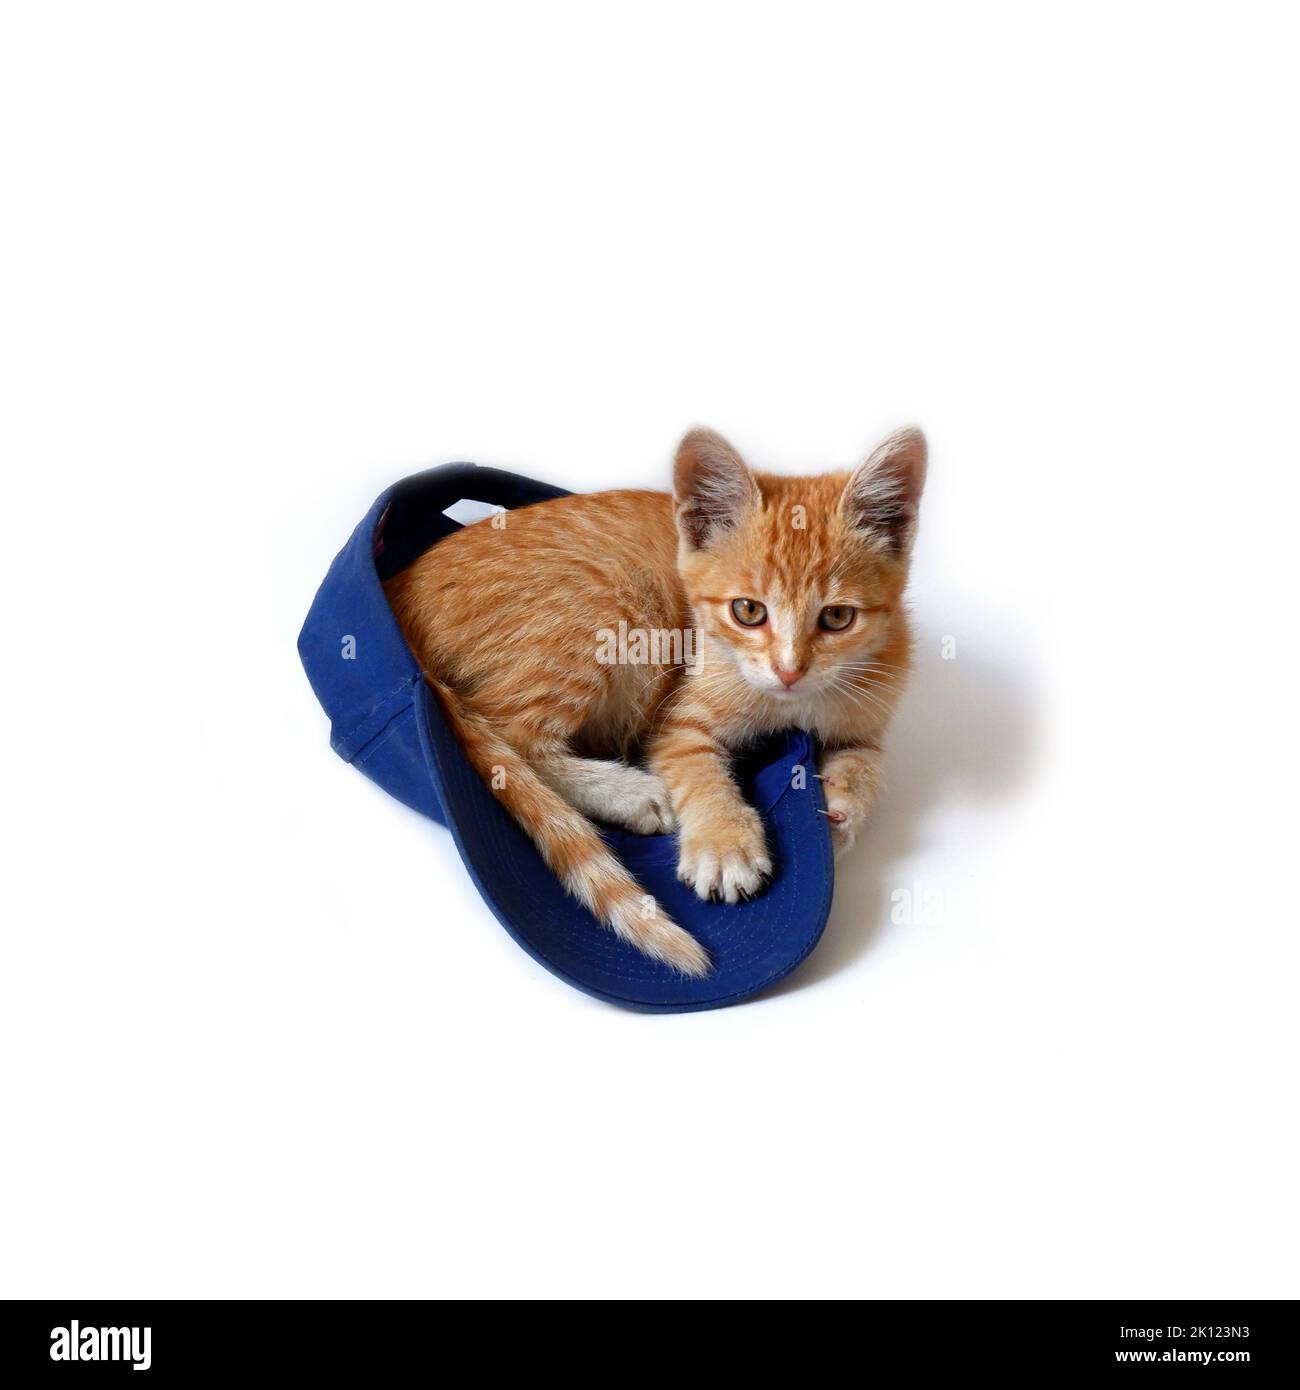 Red kitten lies in a blue baseball cap on a white background. Stock Photo